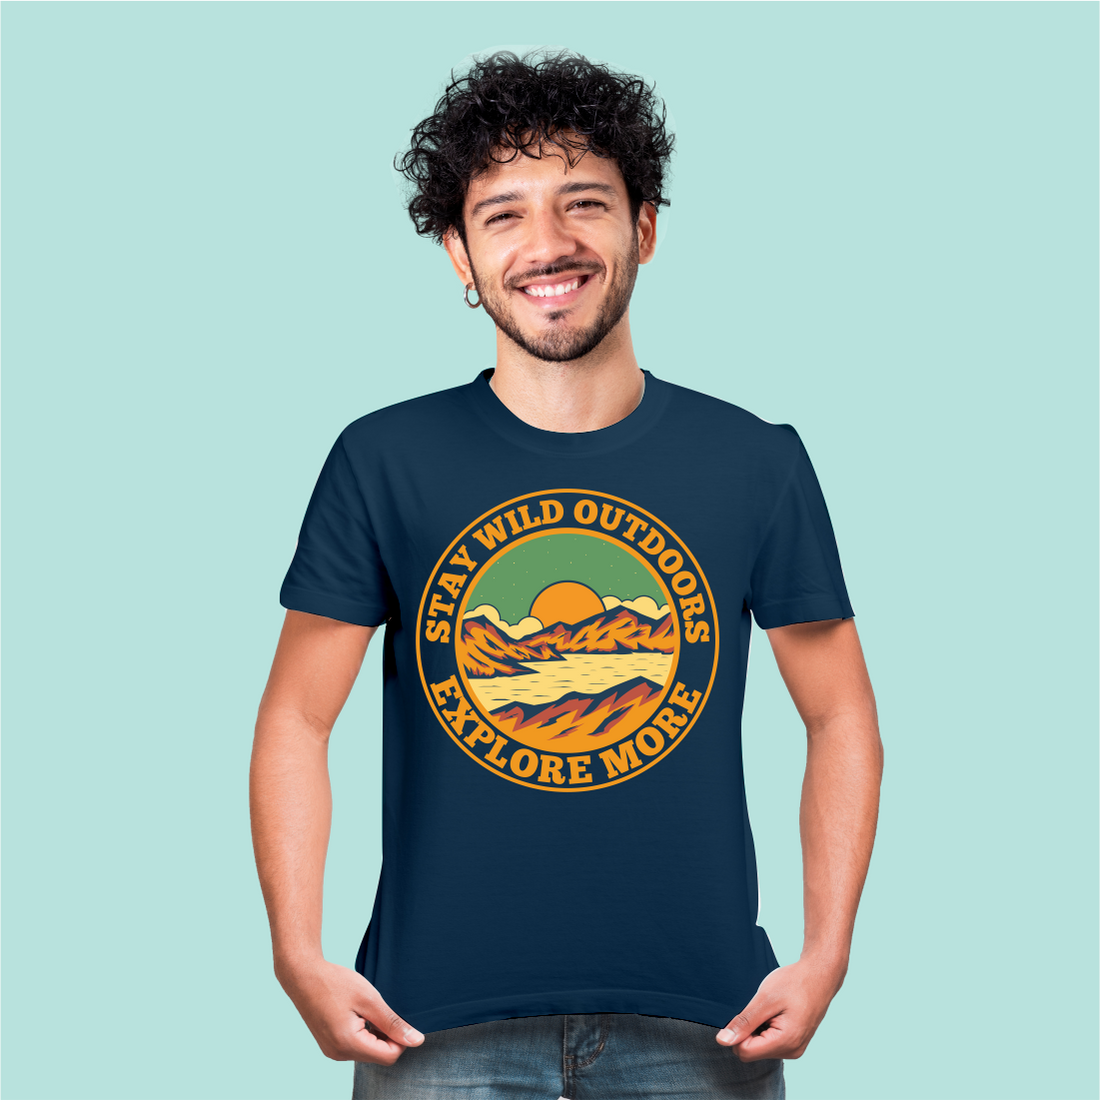 STAY WILD OUTDOORS EXPLORE MORE TRAVEL PRINTED T-SHIRTS